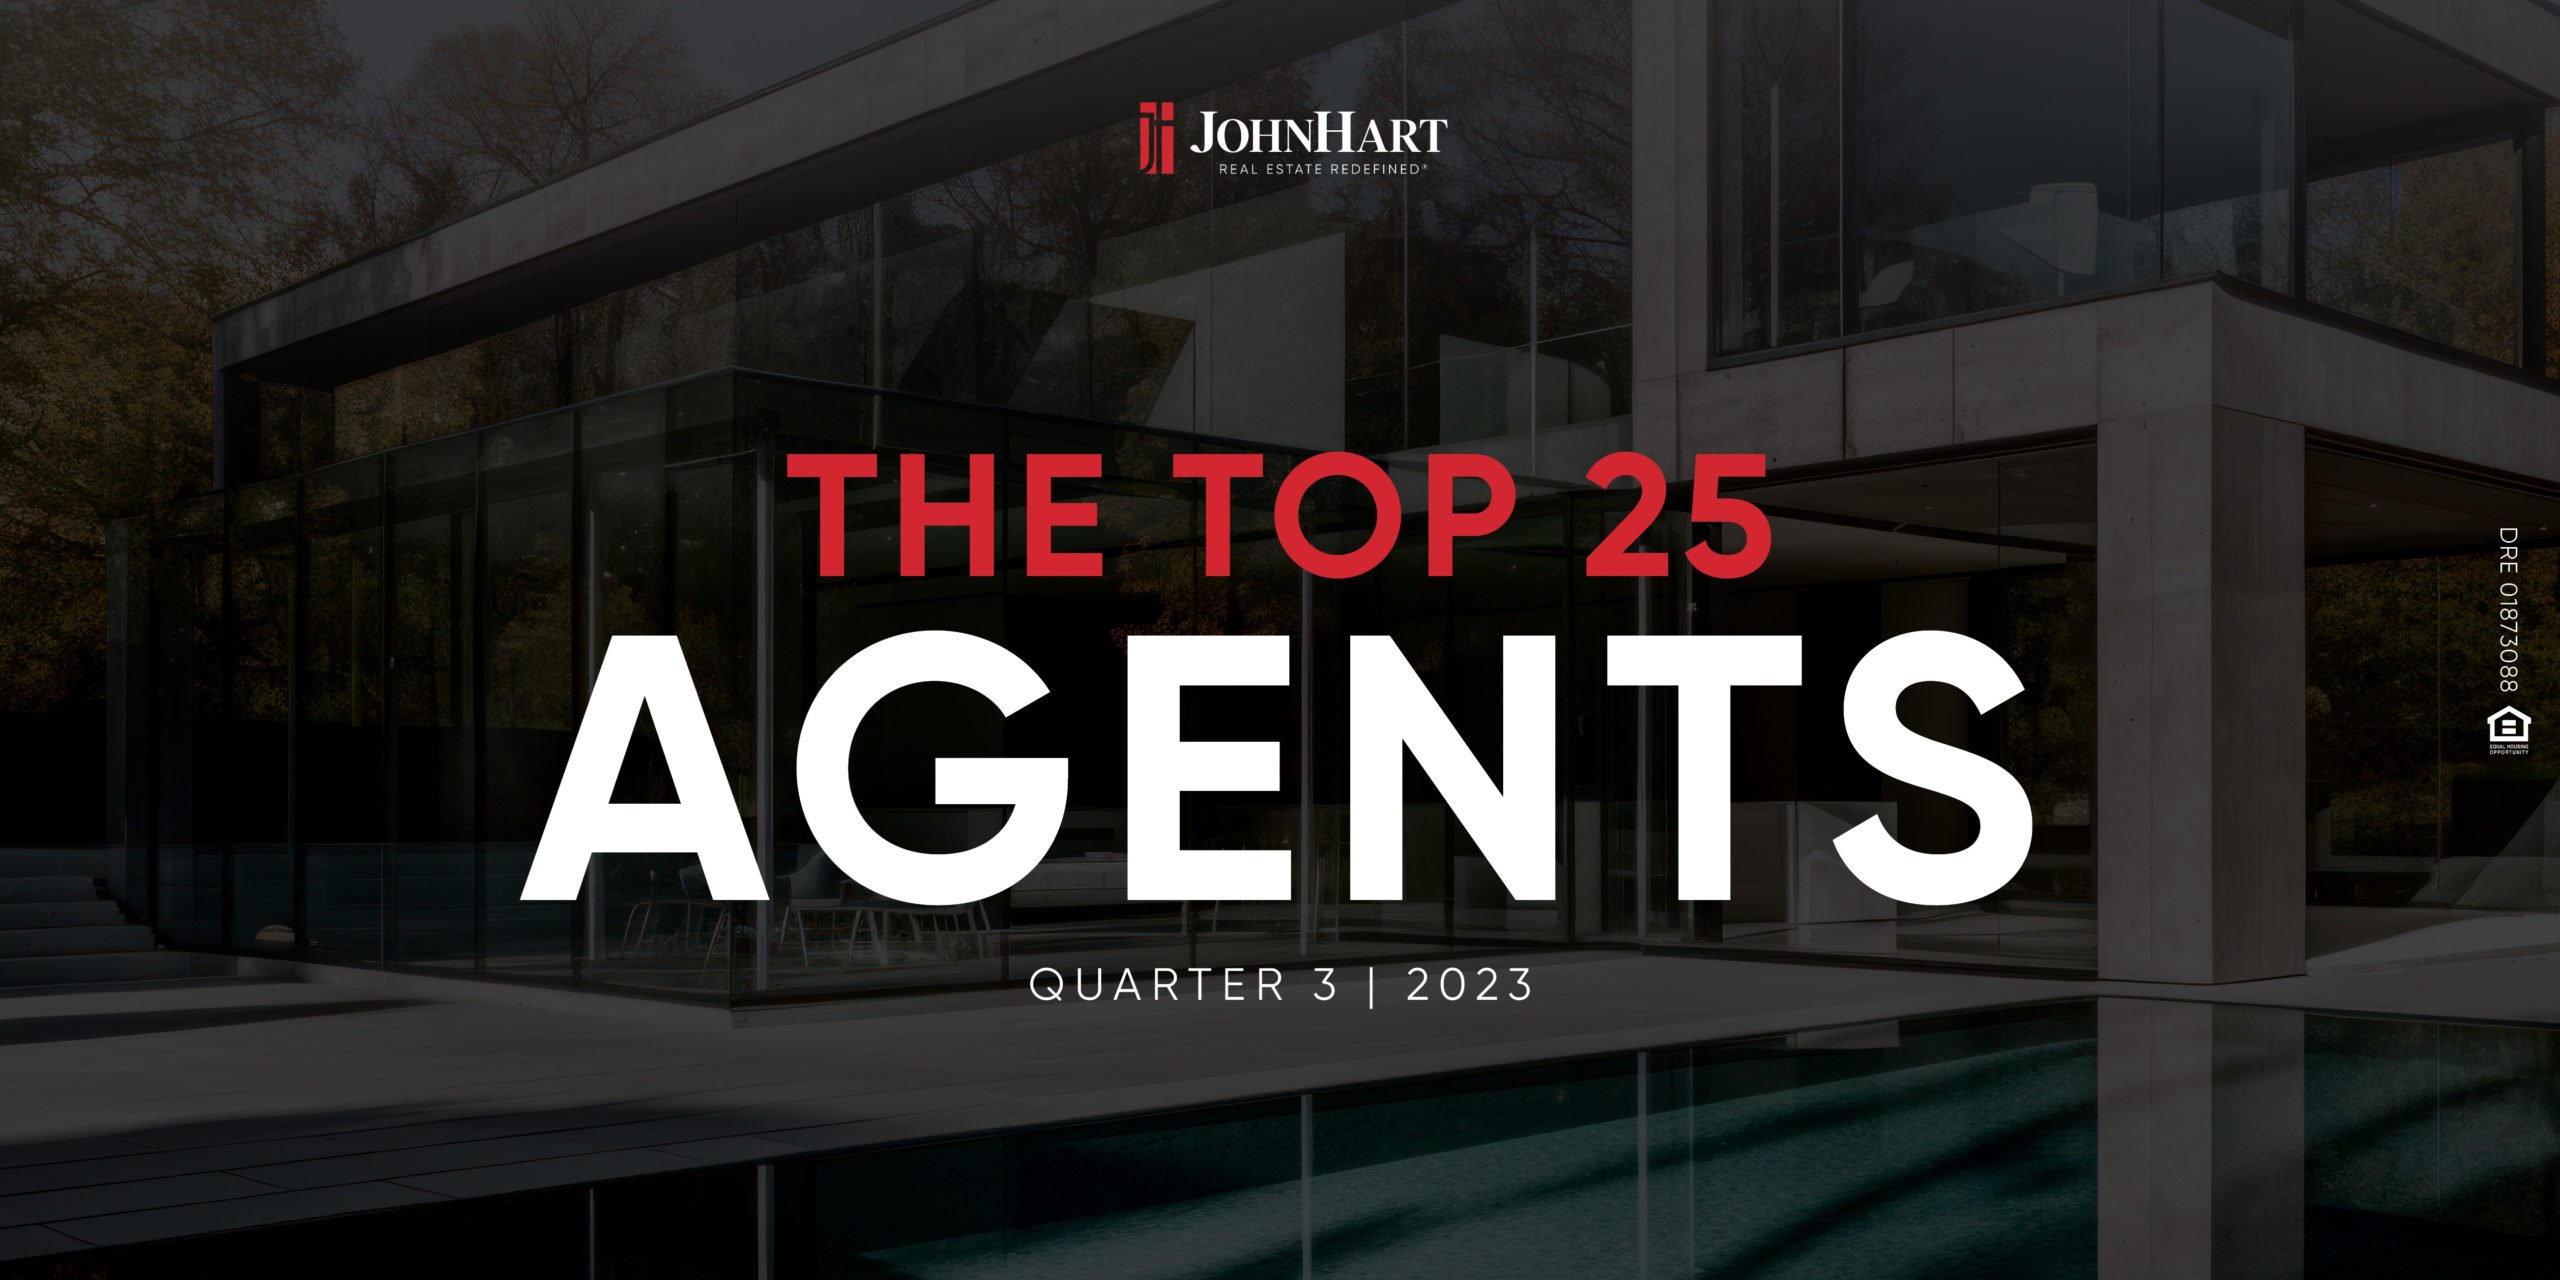 Featured image of The Top 25 Agents of Q3 2023